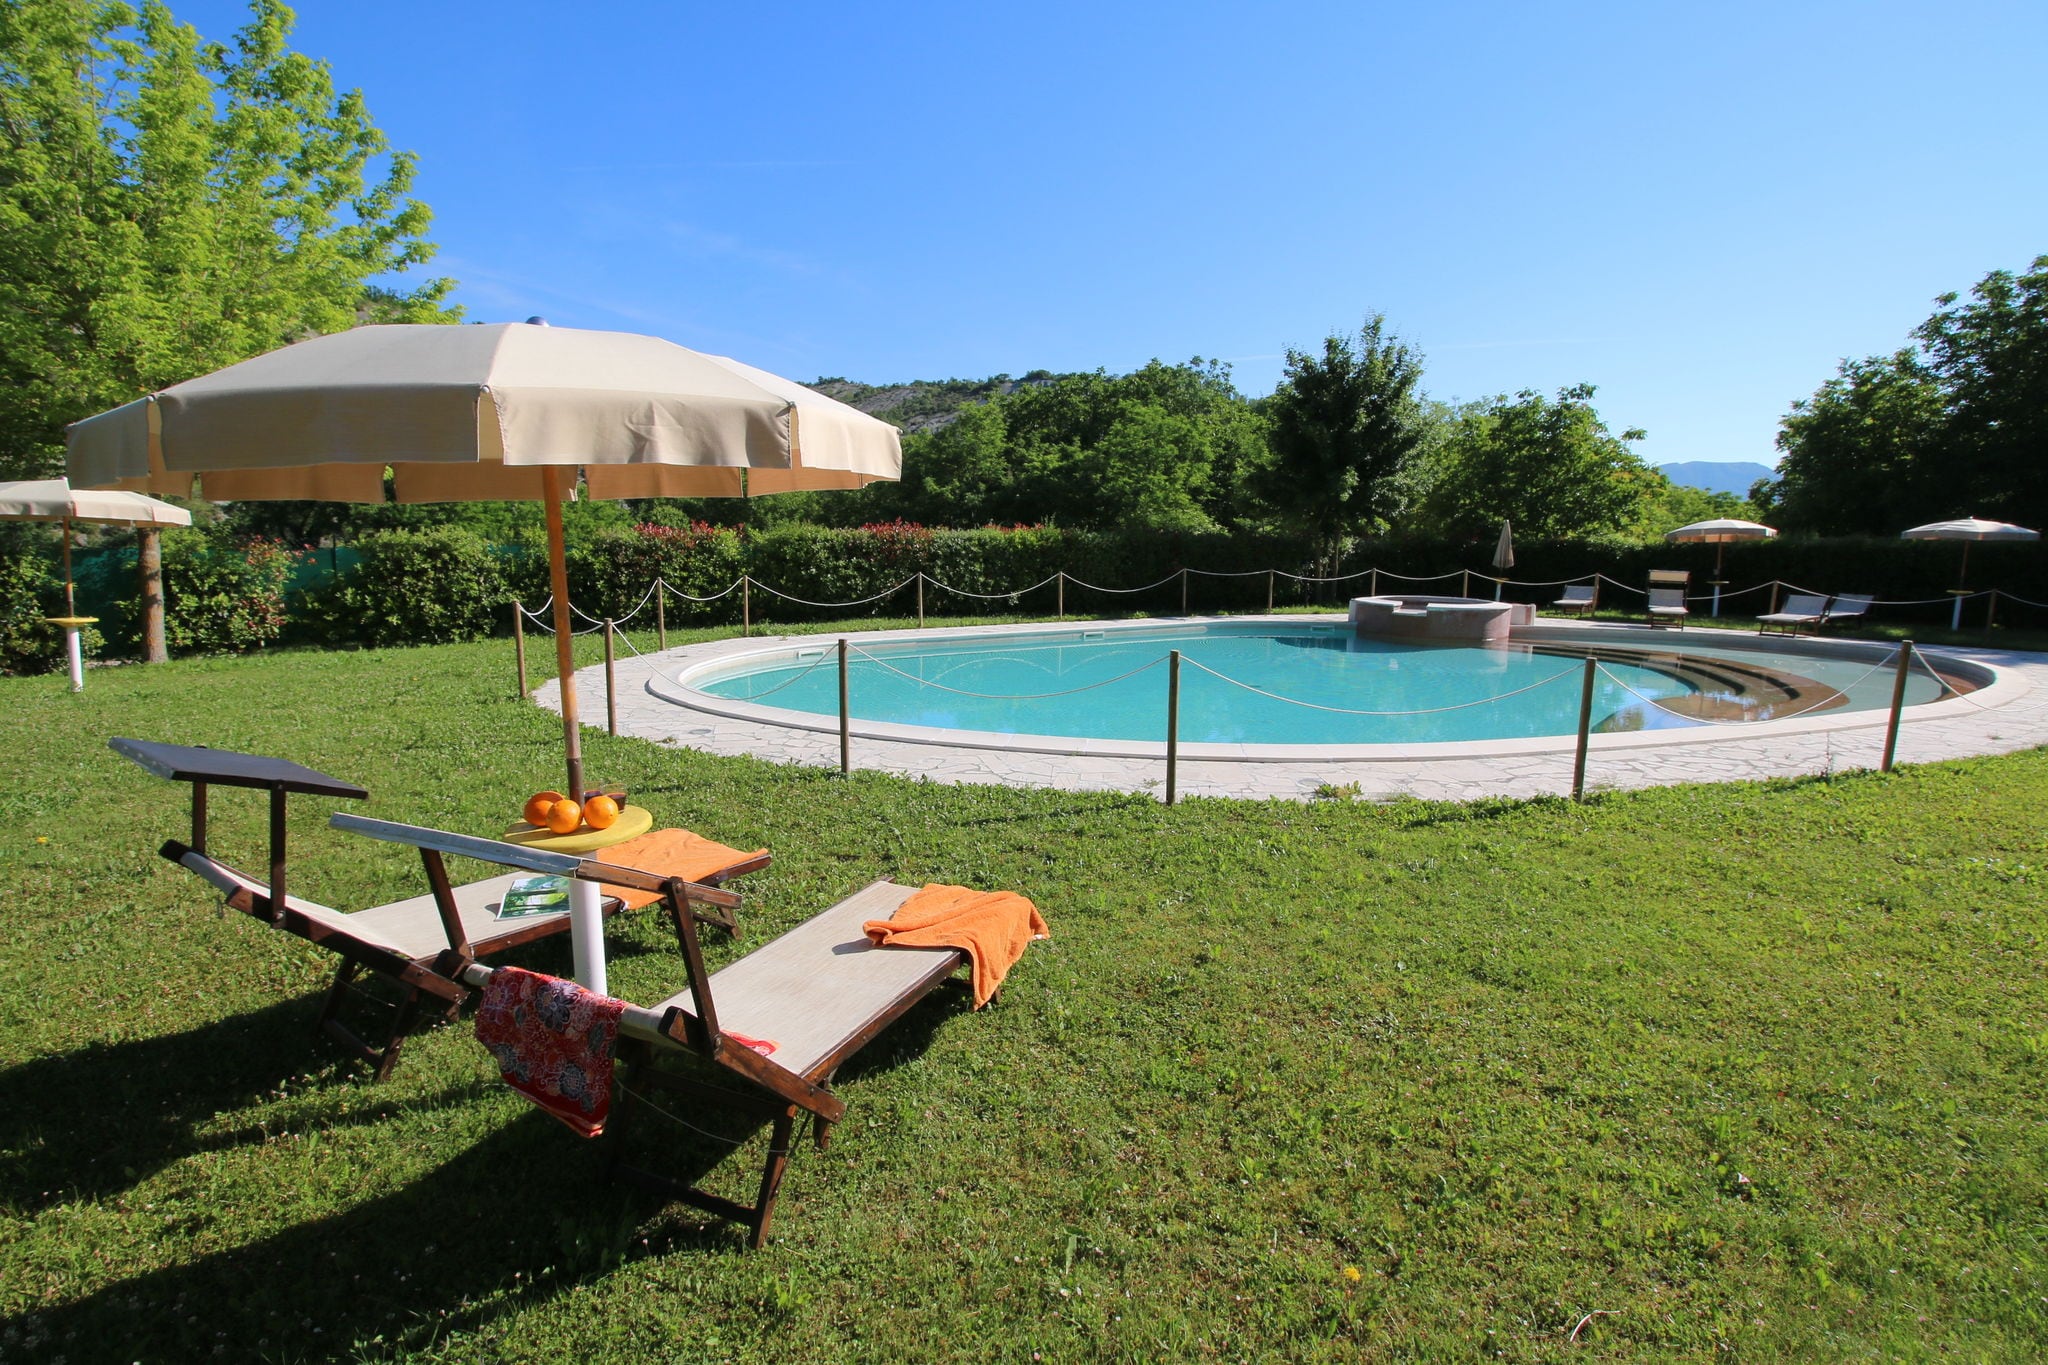 Beautiful holiday home in Apecchio with pool